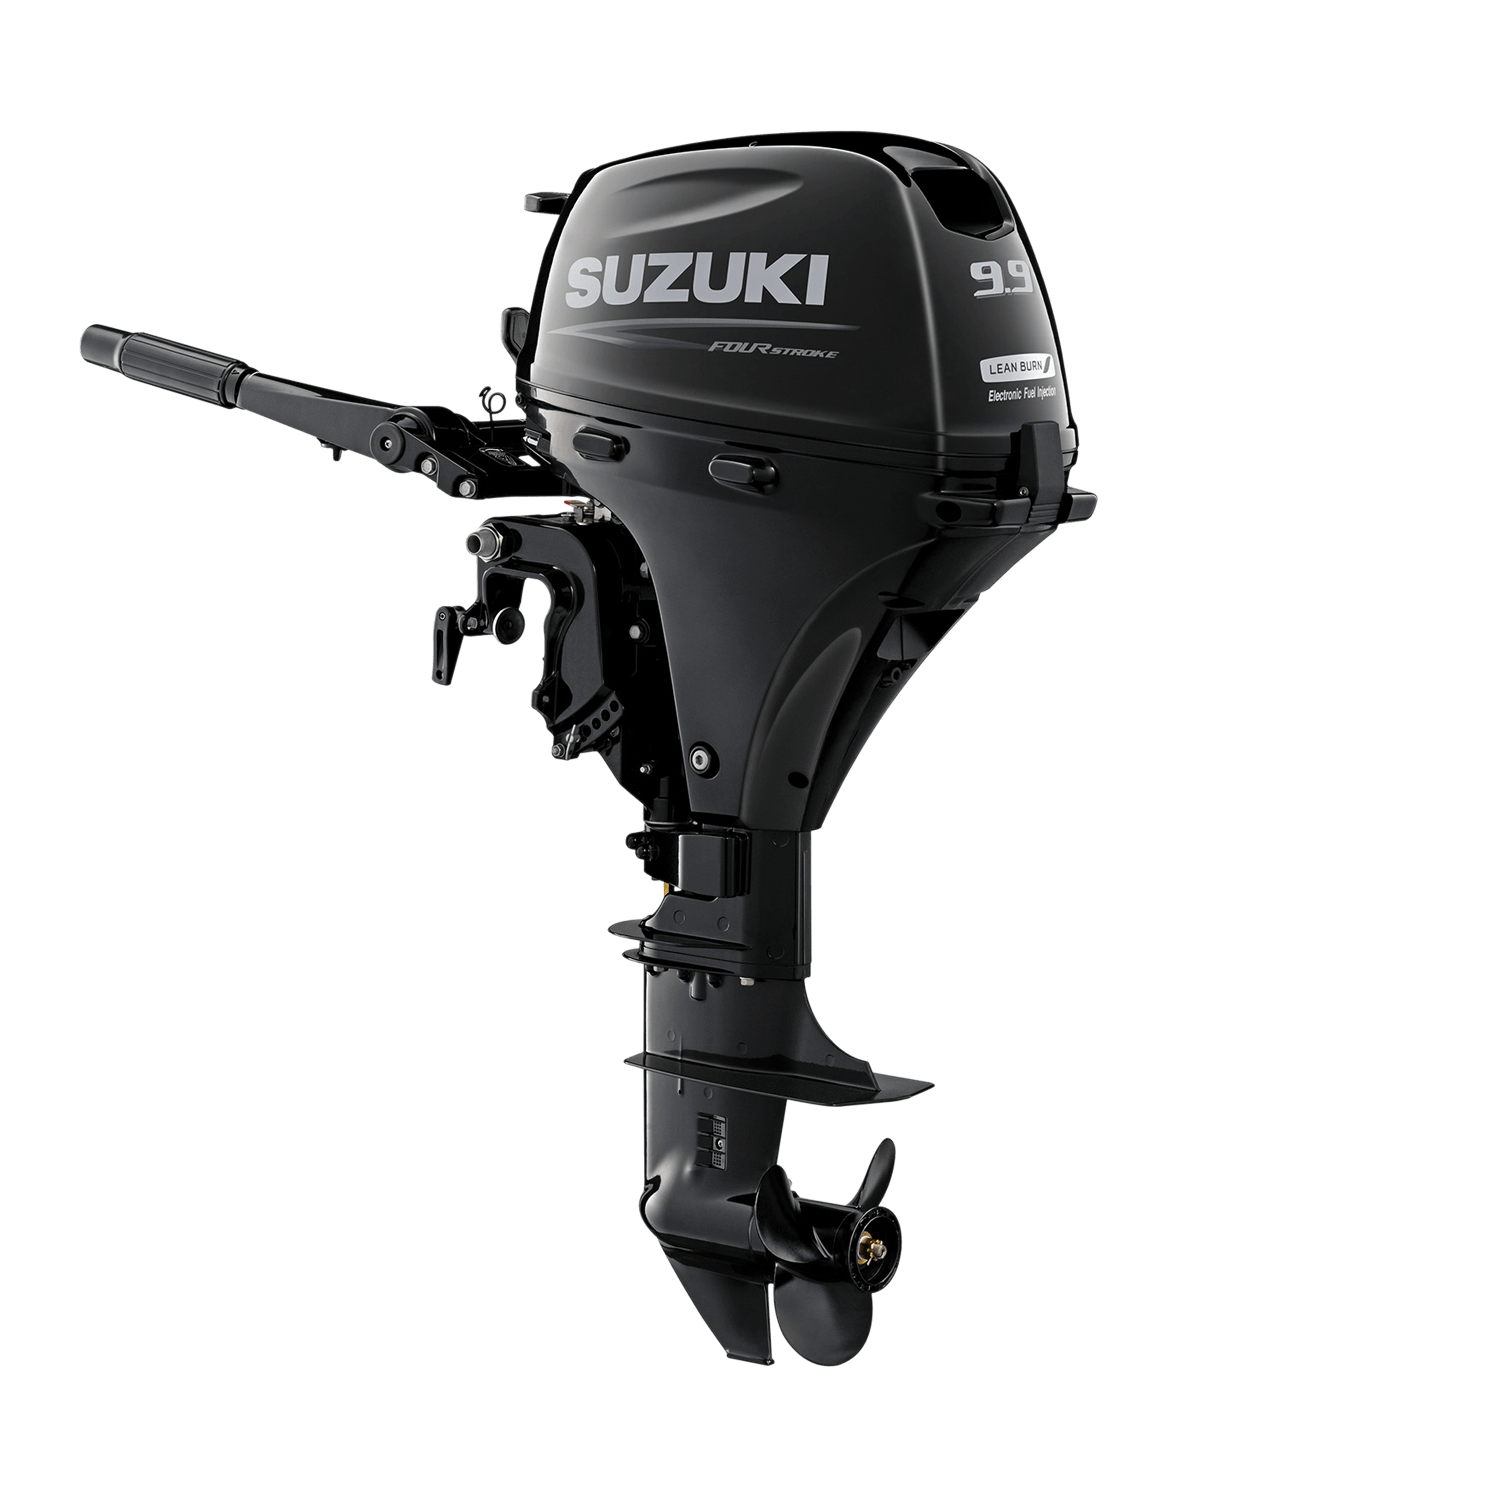 Suzuki 9.9 HP Outboard Engine - Electronic Fuel Injection